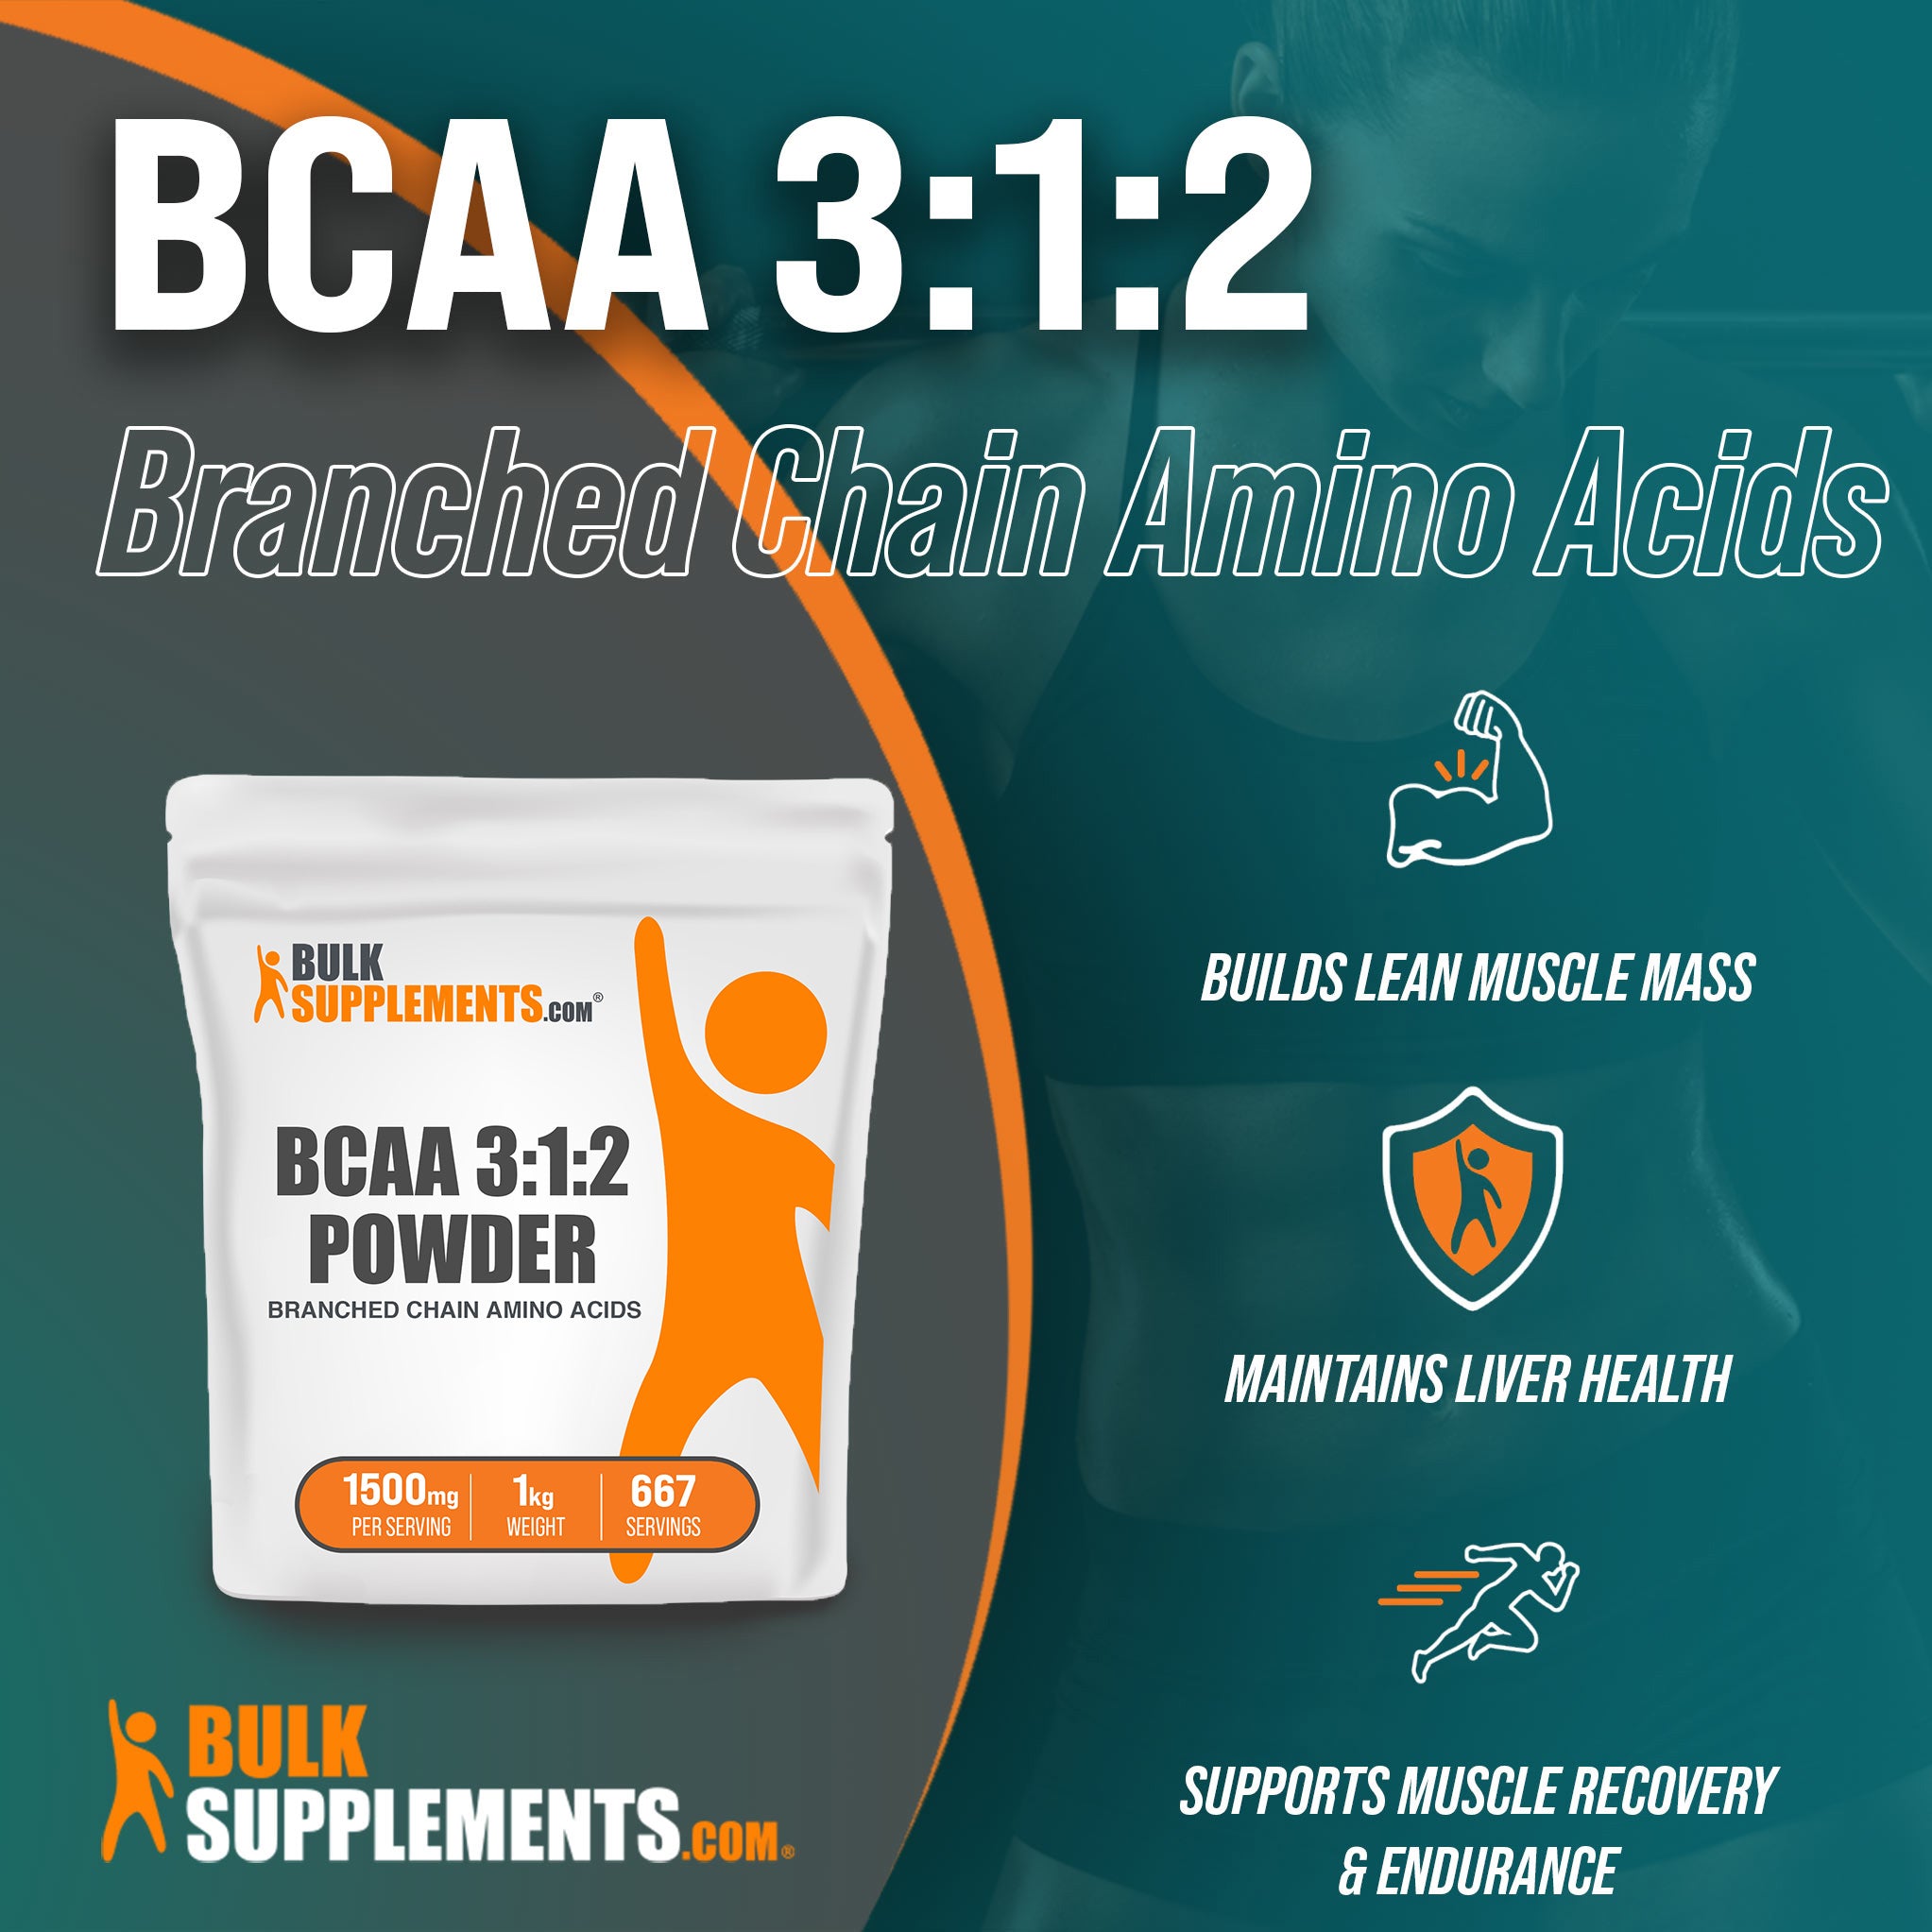 BCAA Powder from Bulk Supplements for lean muscle mass and endurance